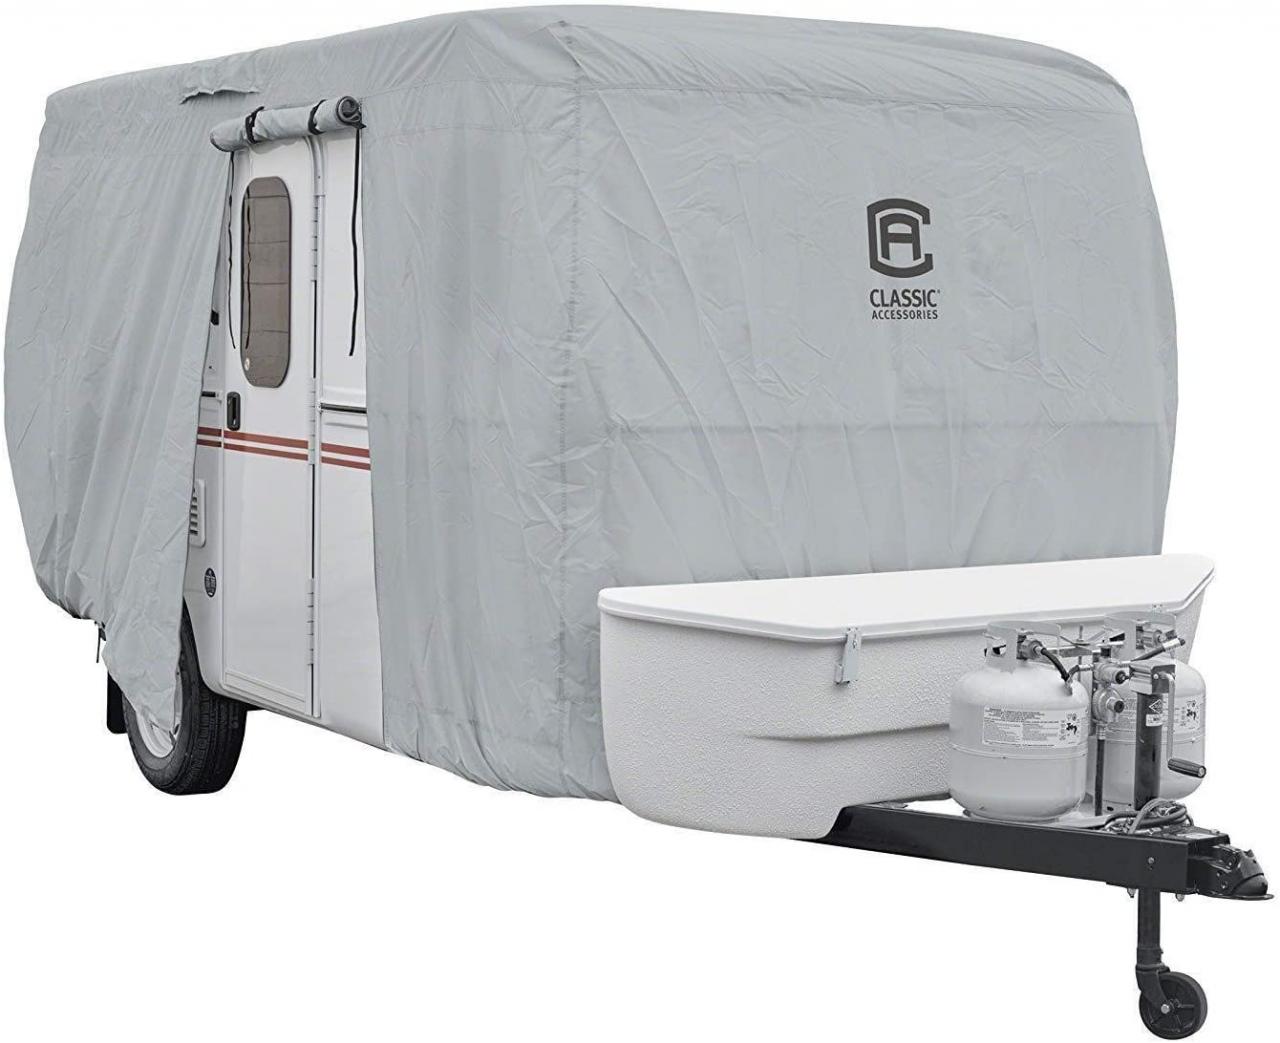 Buy Classic Accessories Over Drive PermaPRO R-Pod Cover, Fits up to 17' 7  long (door in back) Online in Indonesia. B018M3JE5I